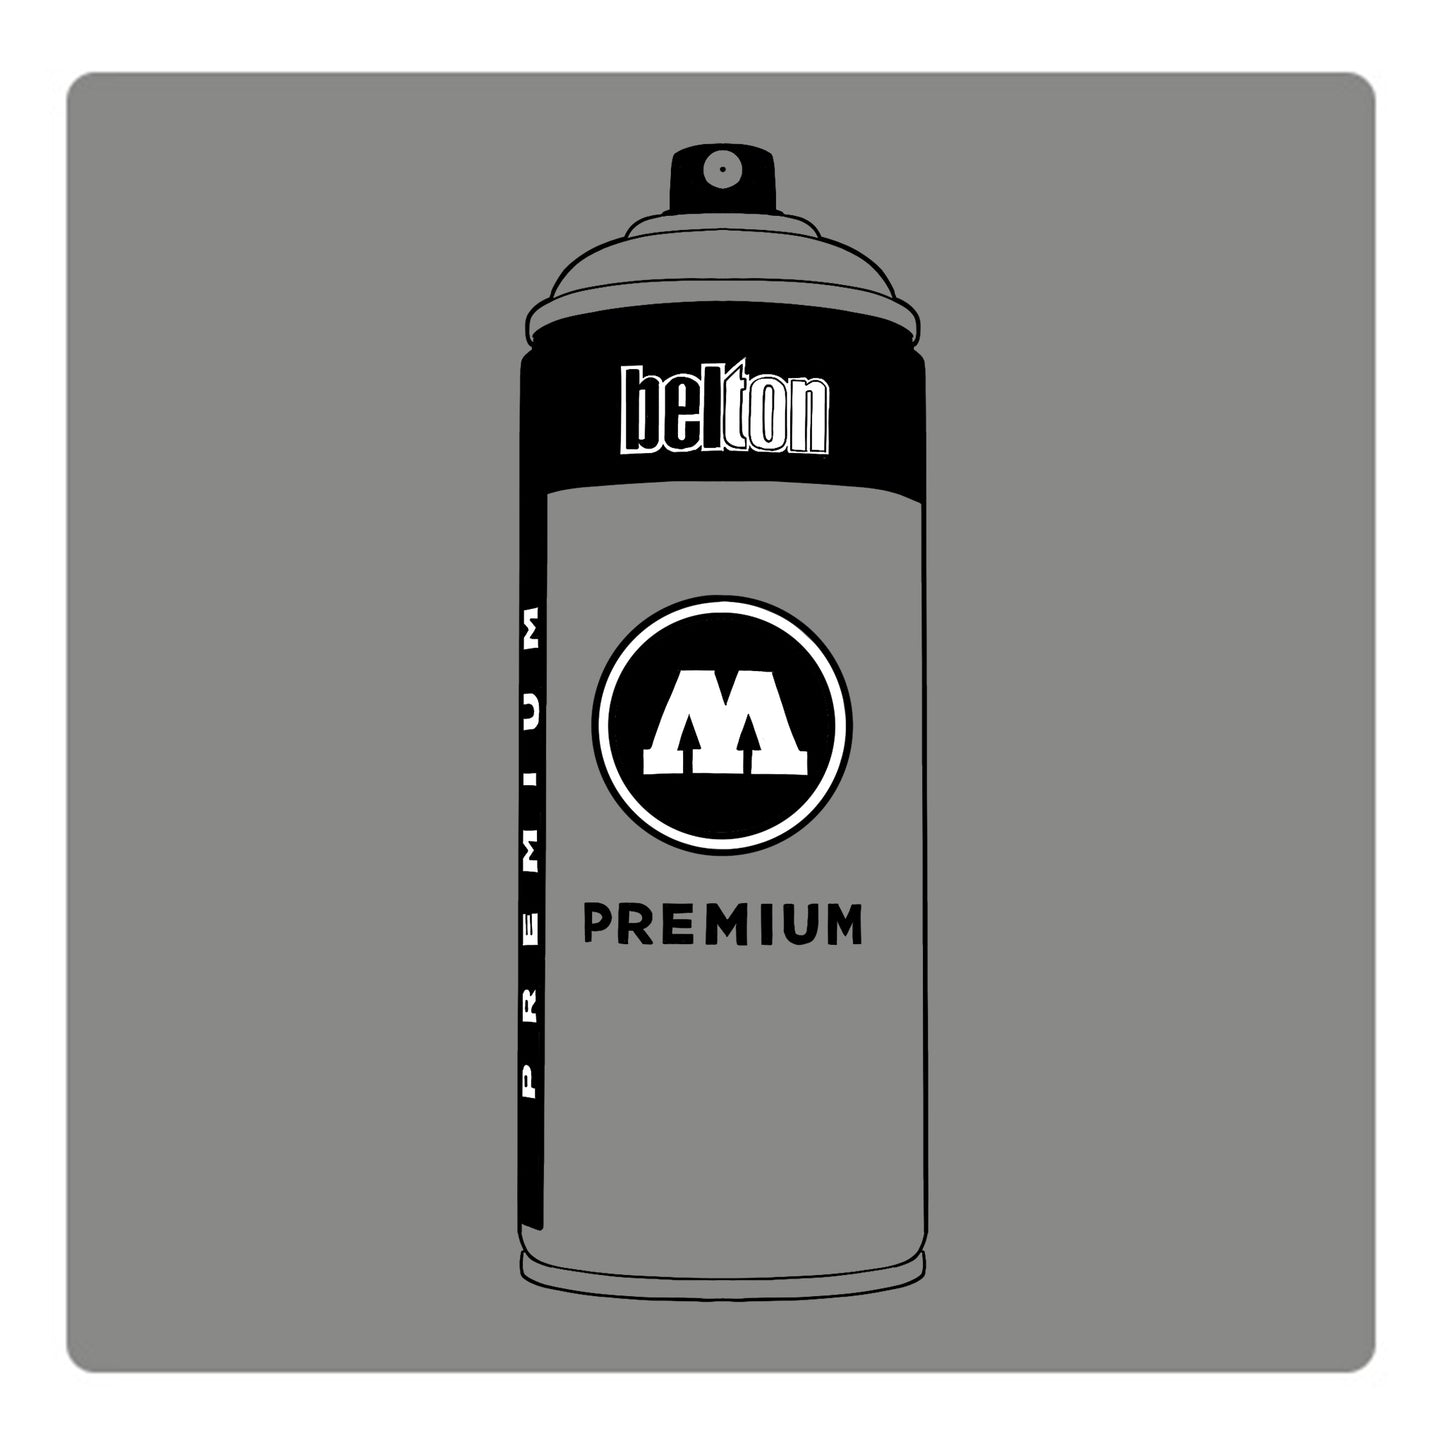 A black outline drawing of a grey spray paint can with the words "belton","premium" and the letter"M" written on the face in black and white font. The background is a color swatch of the same grey with a white border